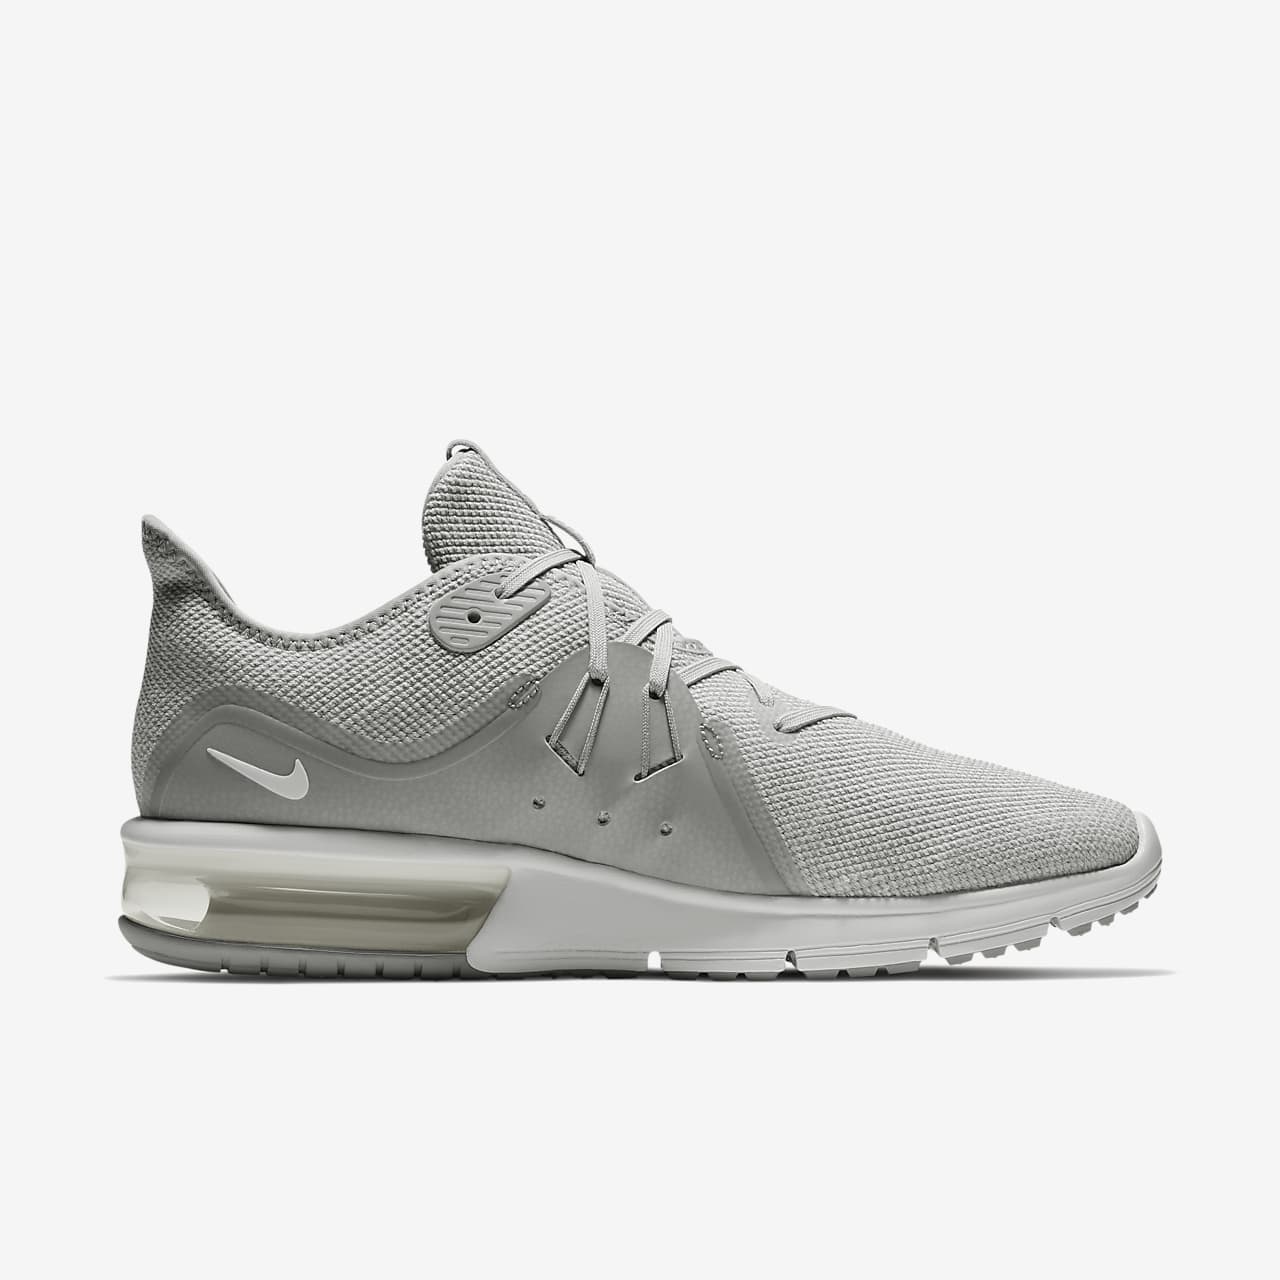 nike air max sequent 3 zappos